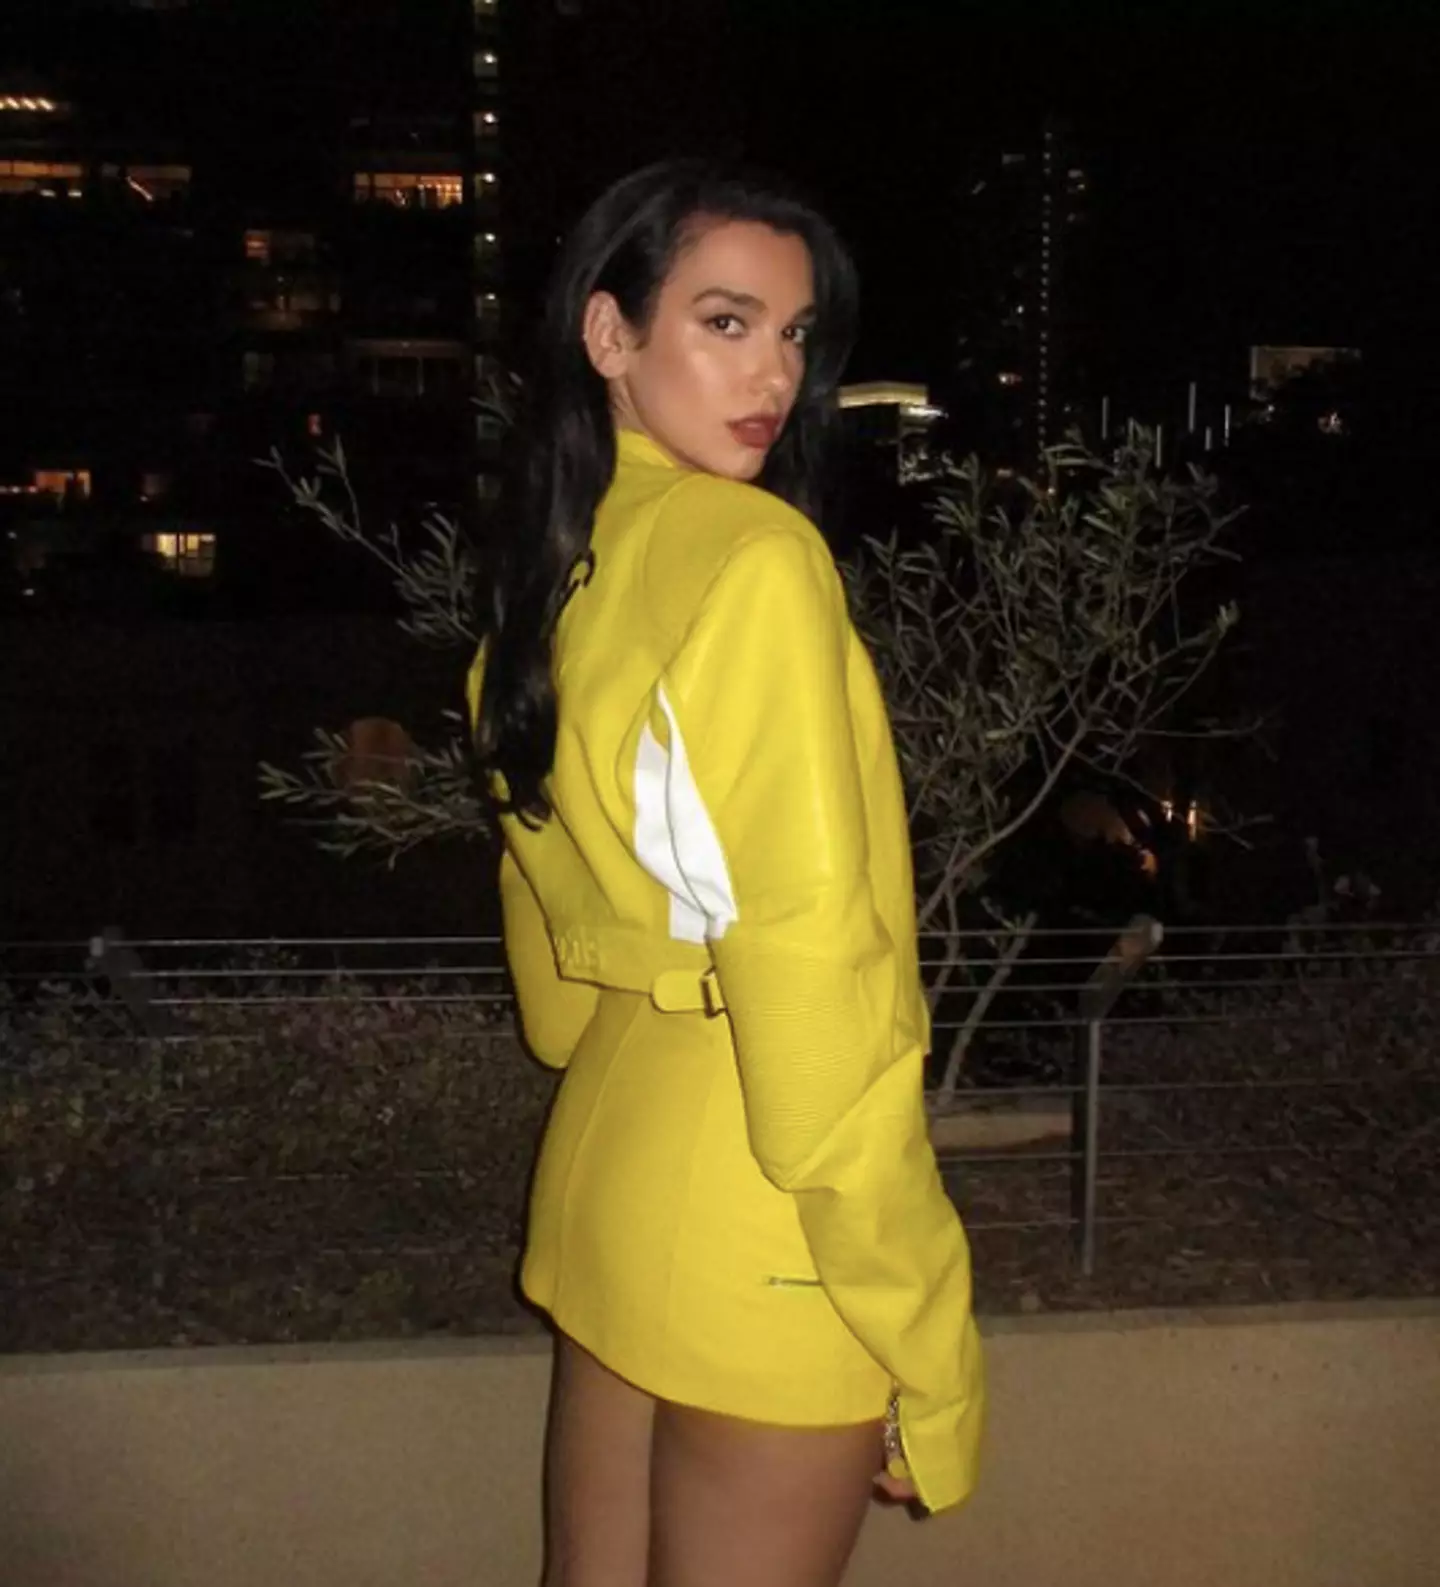 Dua Lipa looks at the camera posing in a yellow jacket and skirt.